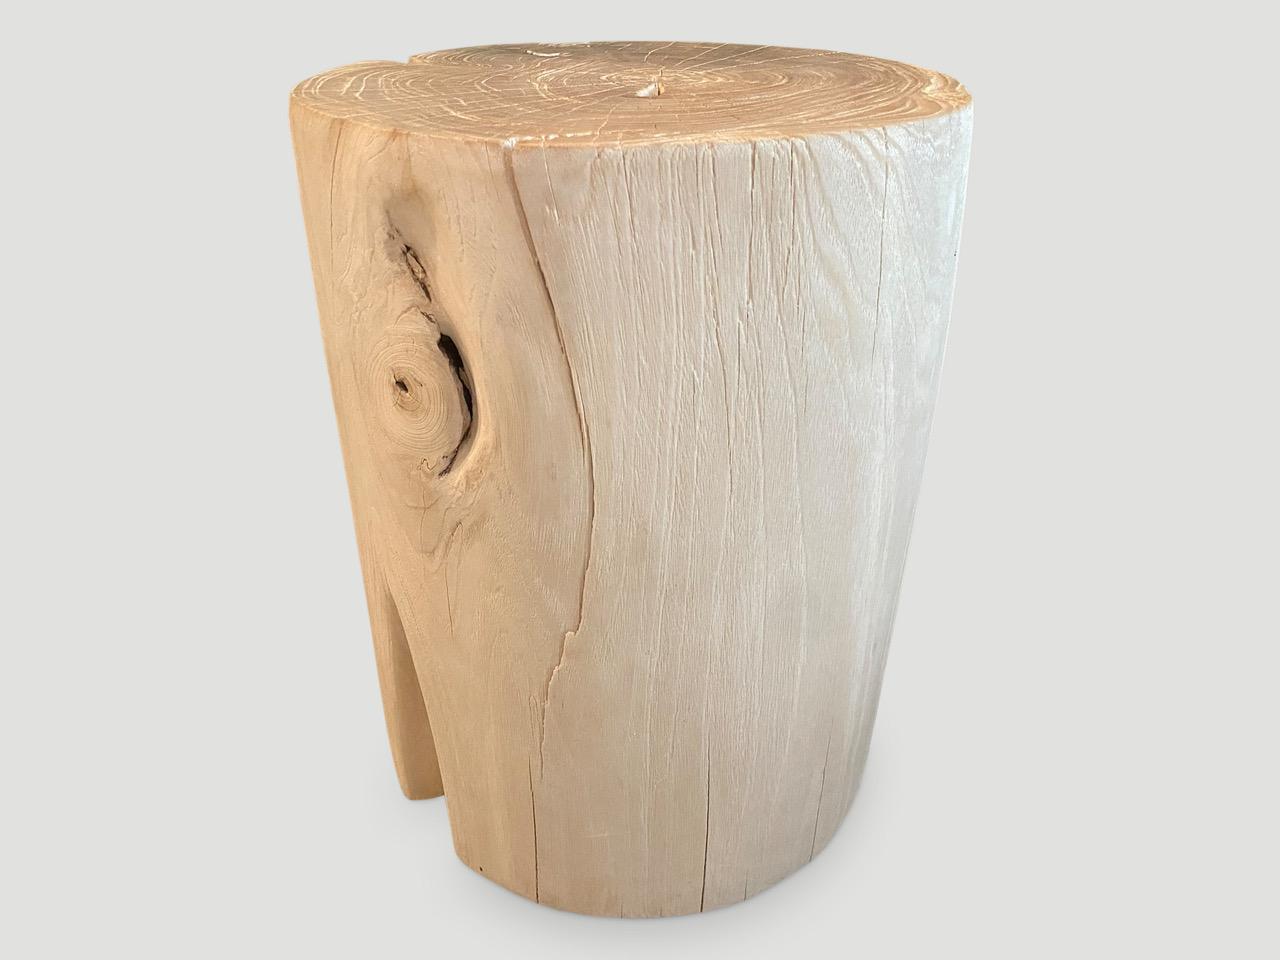 Reclaimed teak wood cylinder side table or stool. Bleached and hand carved into a minimalist cylinder whilst respecting the natural organic wood. Also available charred. Please inquire. We have a collection.

The St. Barts Collection features an